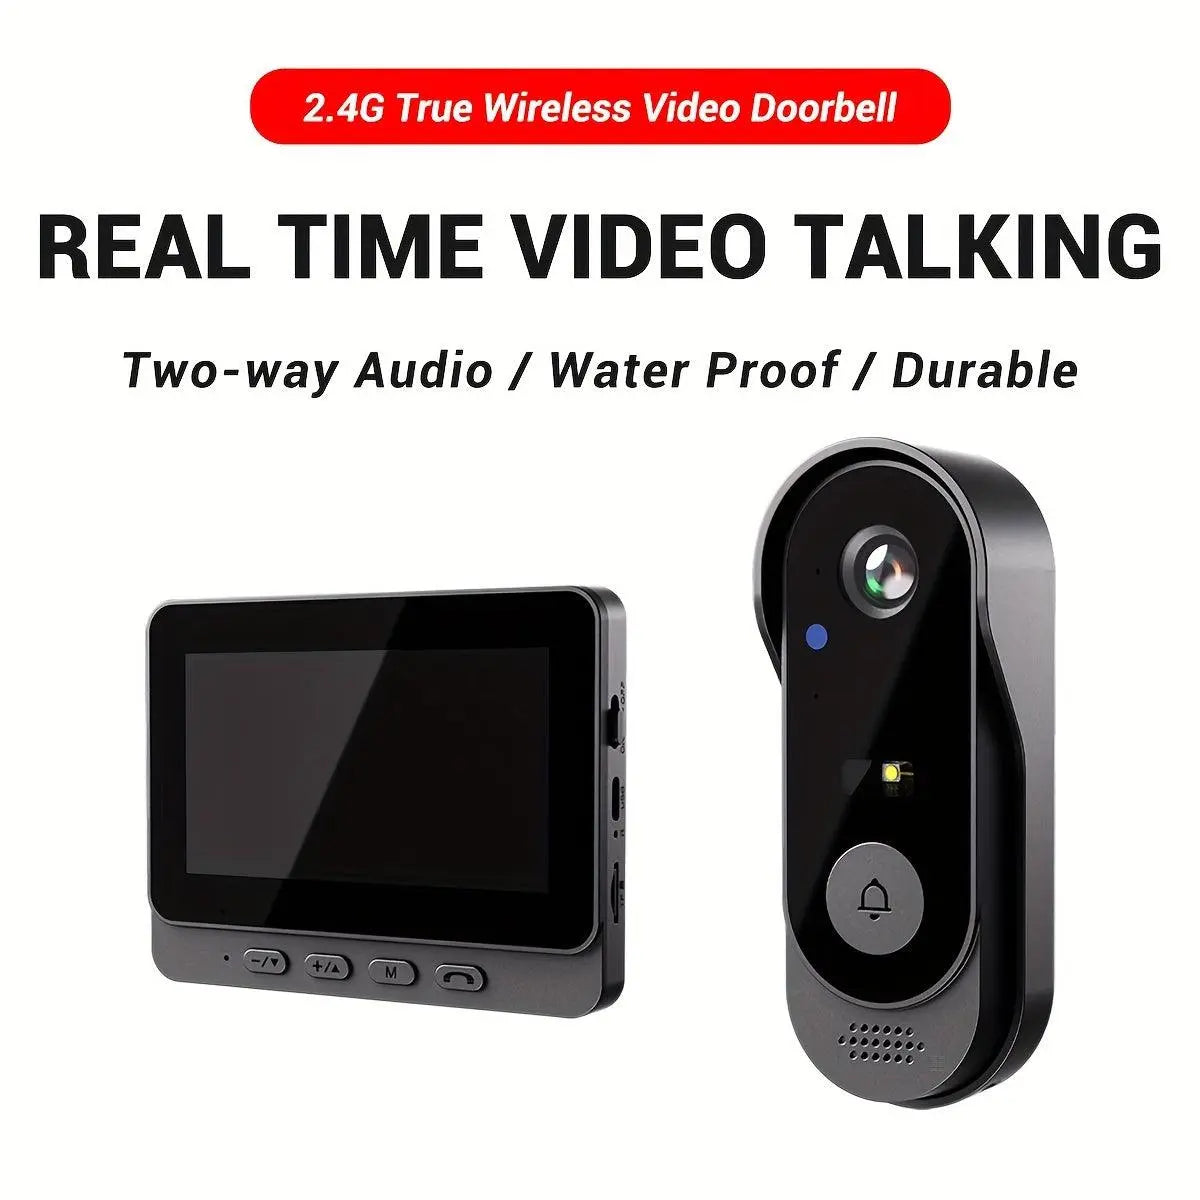 waterproof-wireless-video-doorbell-set-480p-camera-4-3-inch-screen-no-app-or-network-required-elder-friendly-sd-card-slot-for-image-video-storage